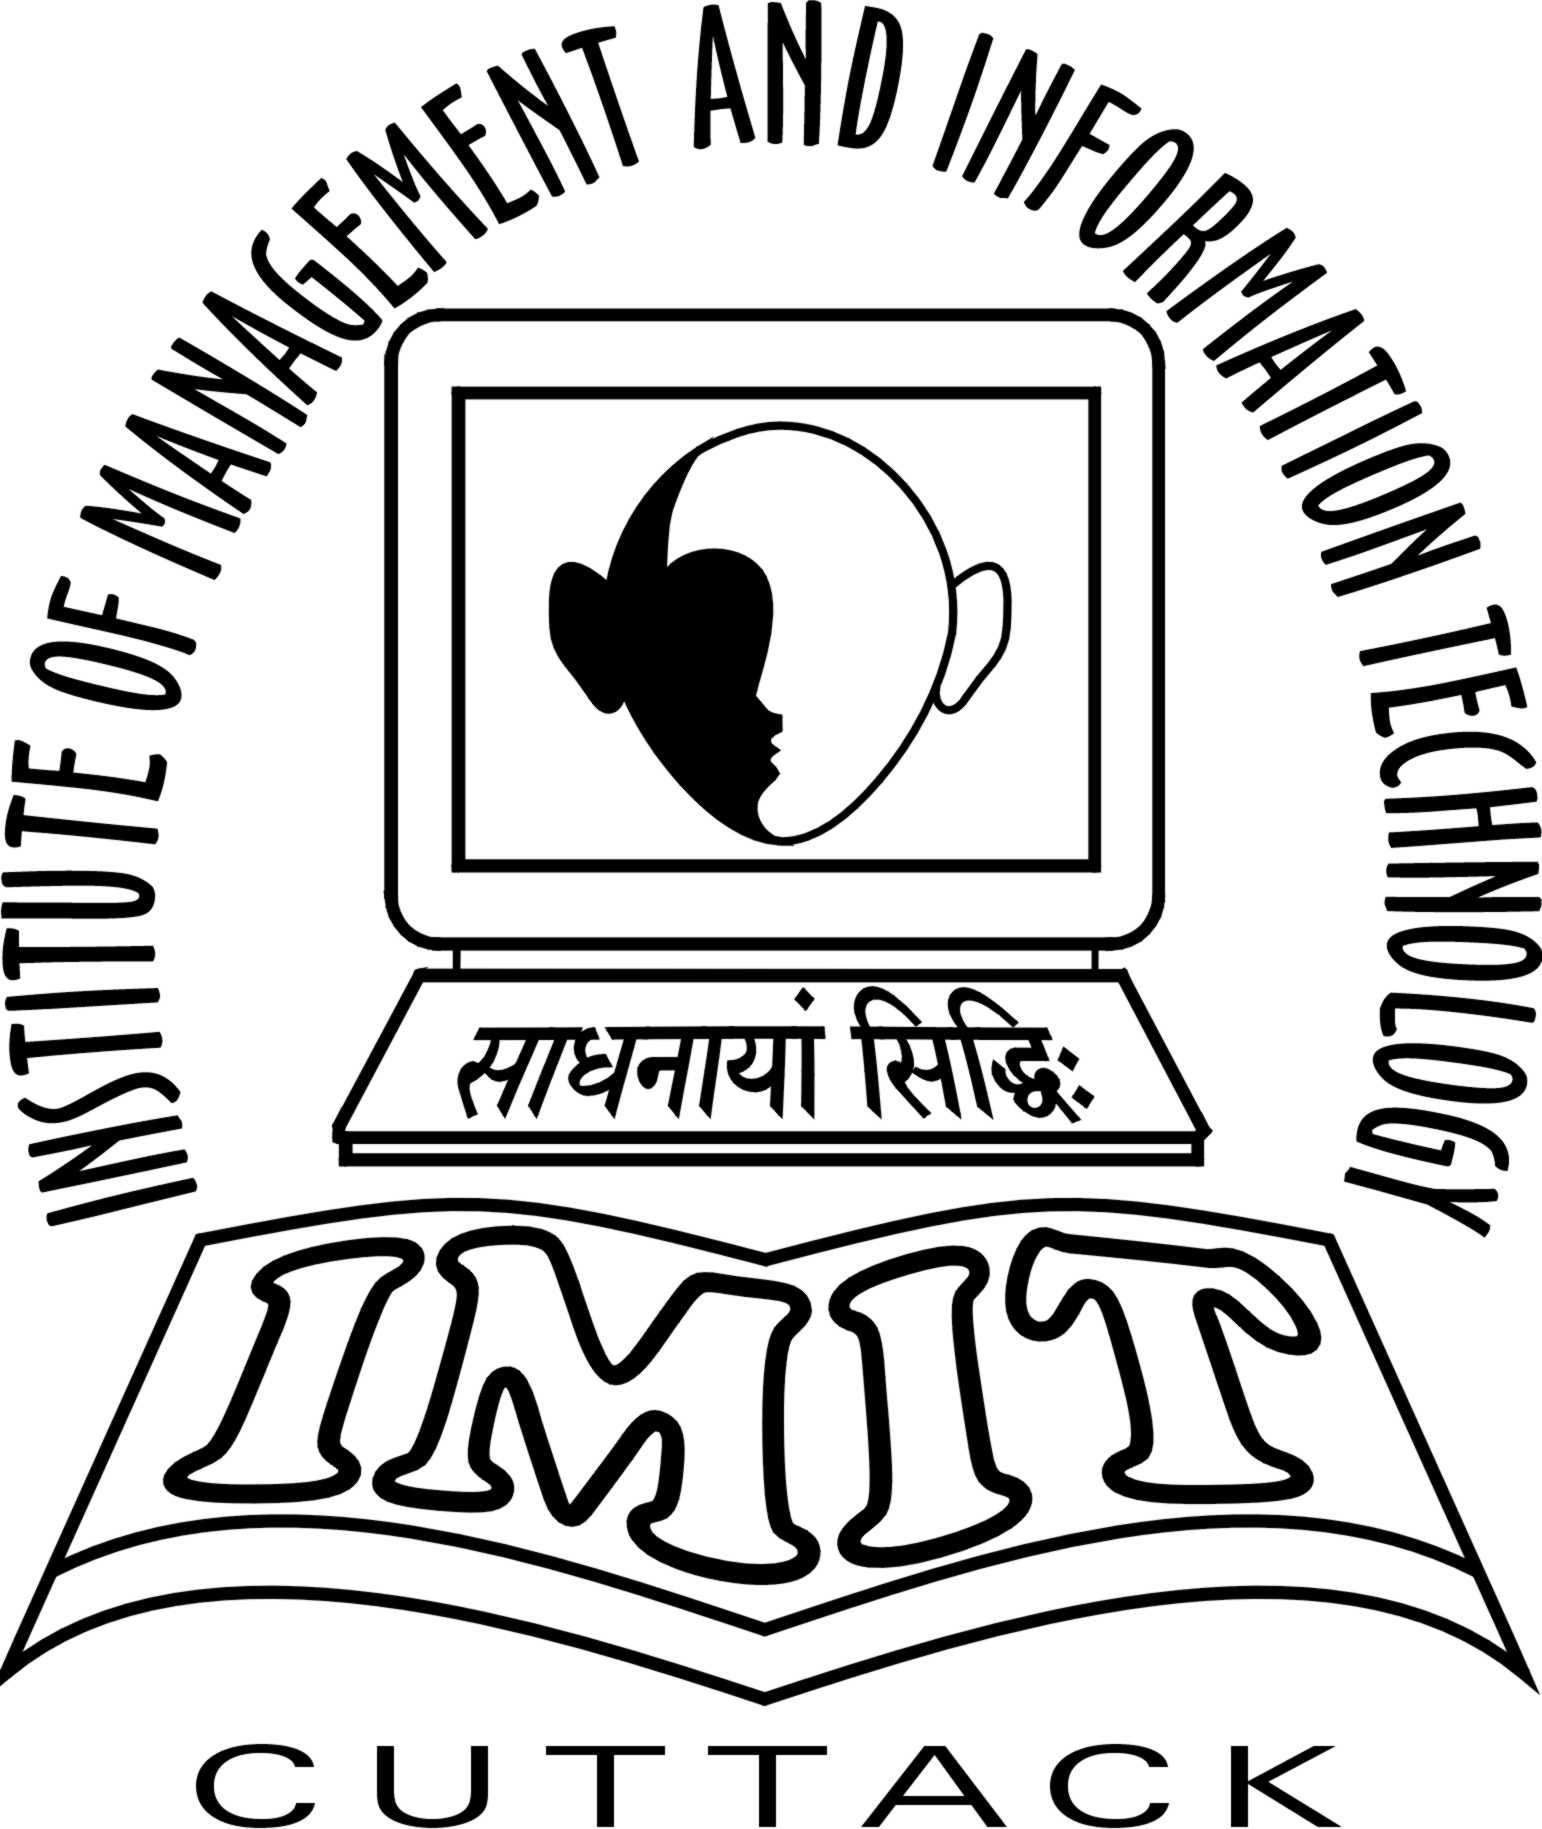 INSTITUTE OF MANAGEMENT AND INFORMATION TECHNOLOGY, CUTTACK